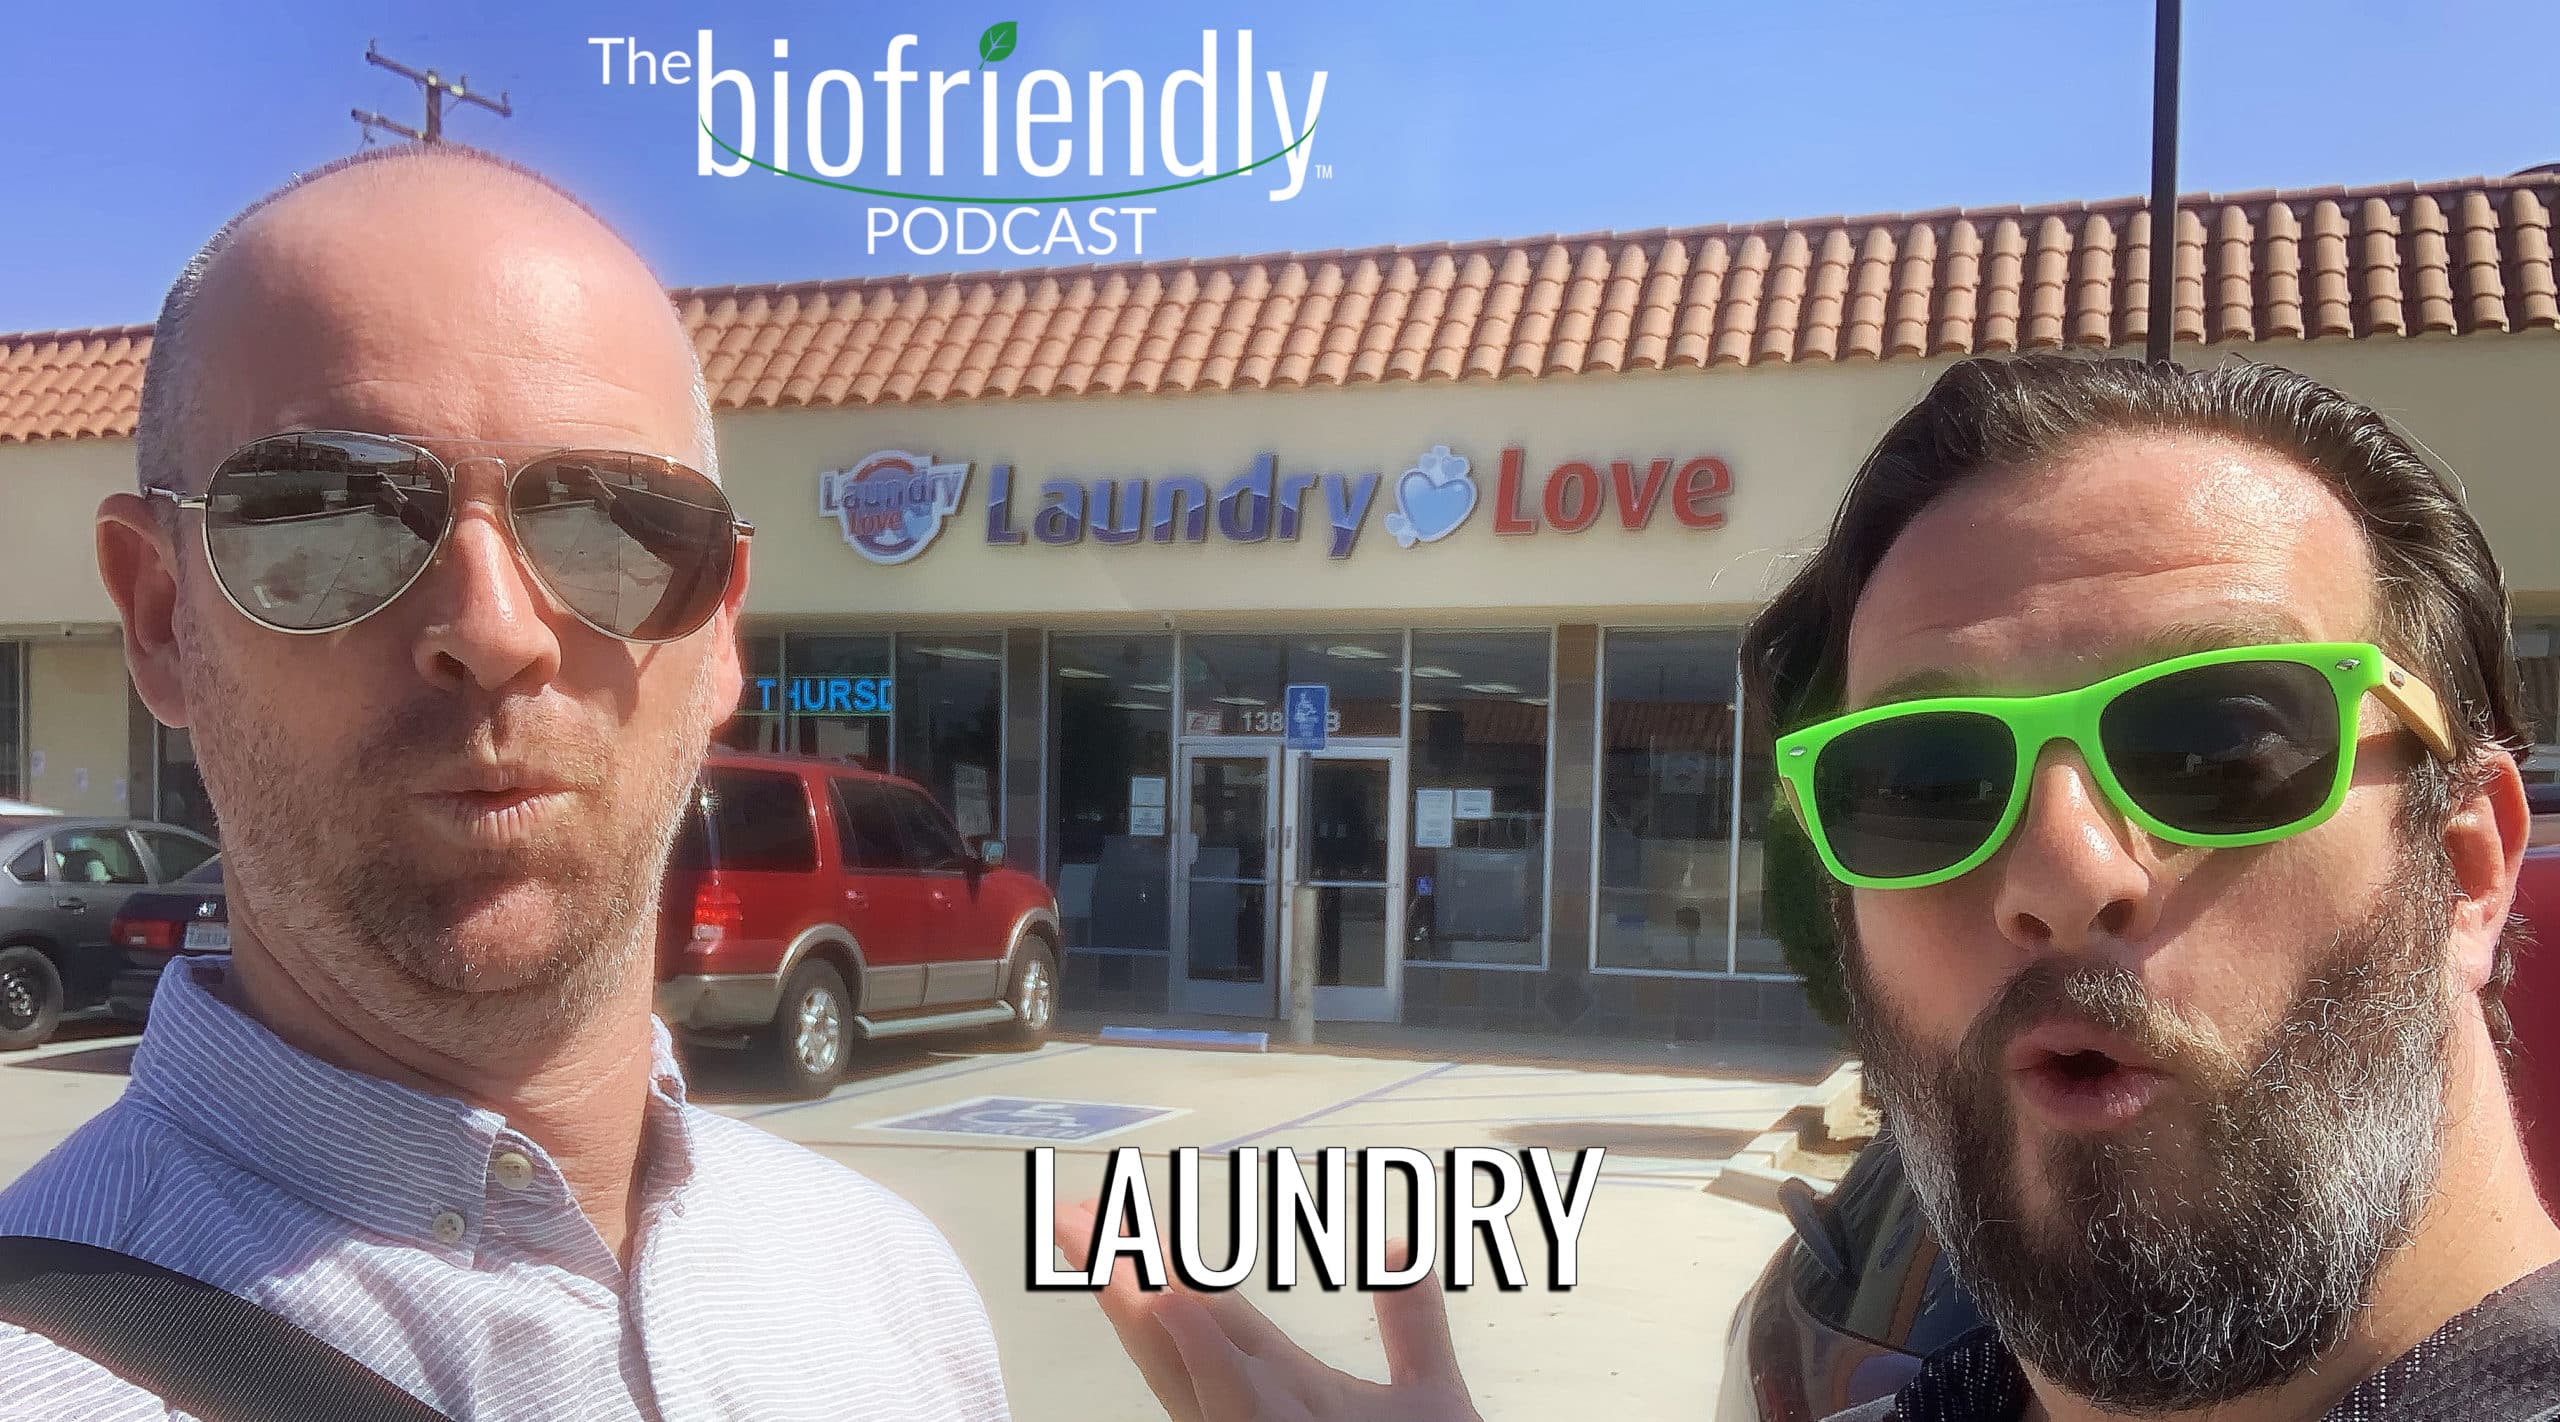 The Biofriendly Podcast - Episode 25 - Laundry